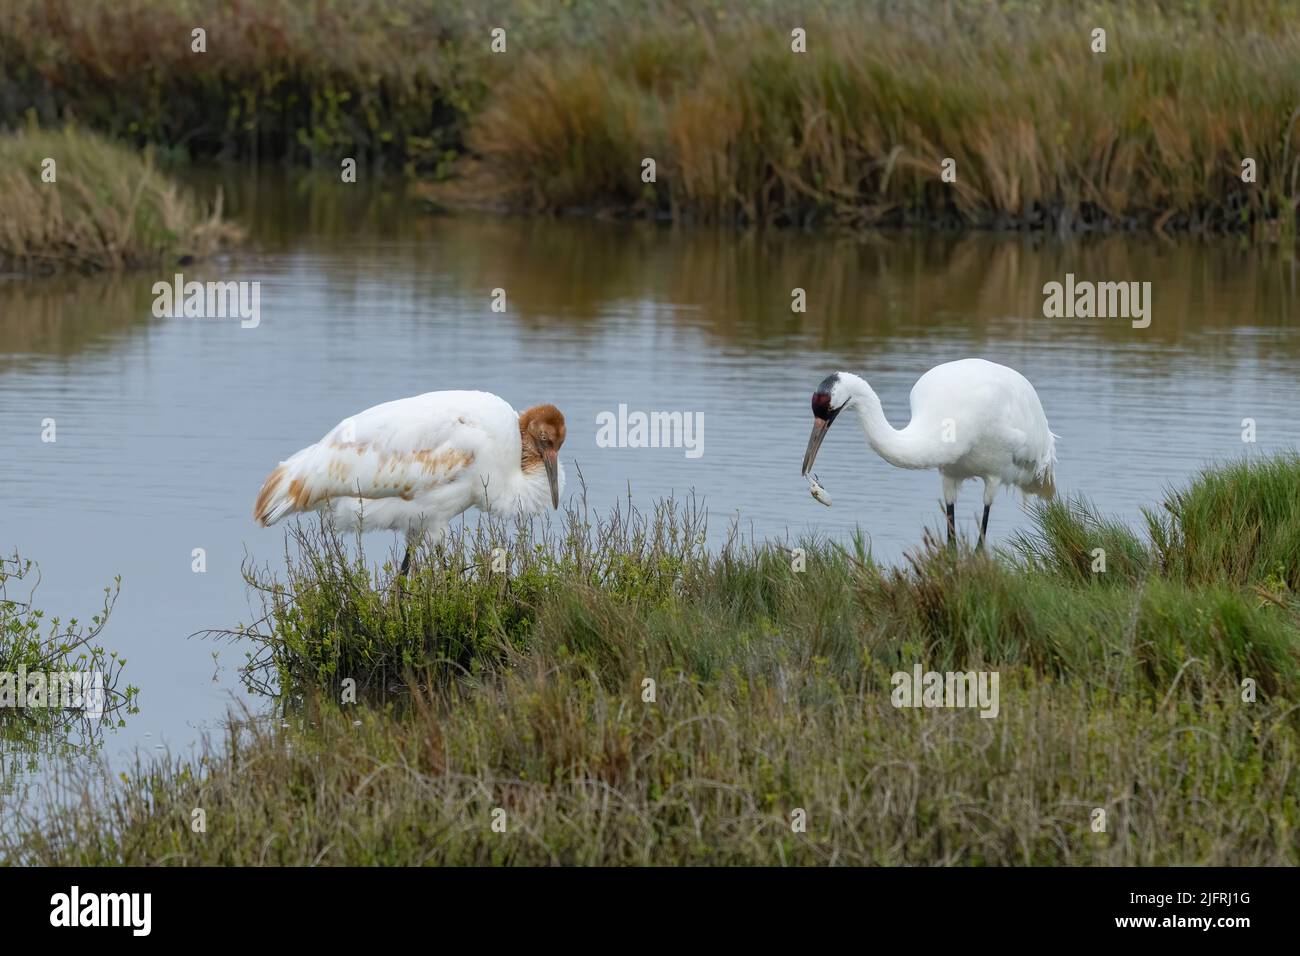 A Whooping Crane, Grus americana, catching an Atlantic Blue Crab in the Aransas National Wildlife Refuge in Texas.  The crane with the rusty head is a Stock Photo